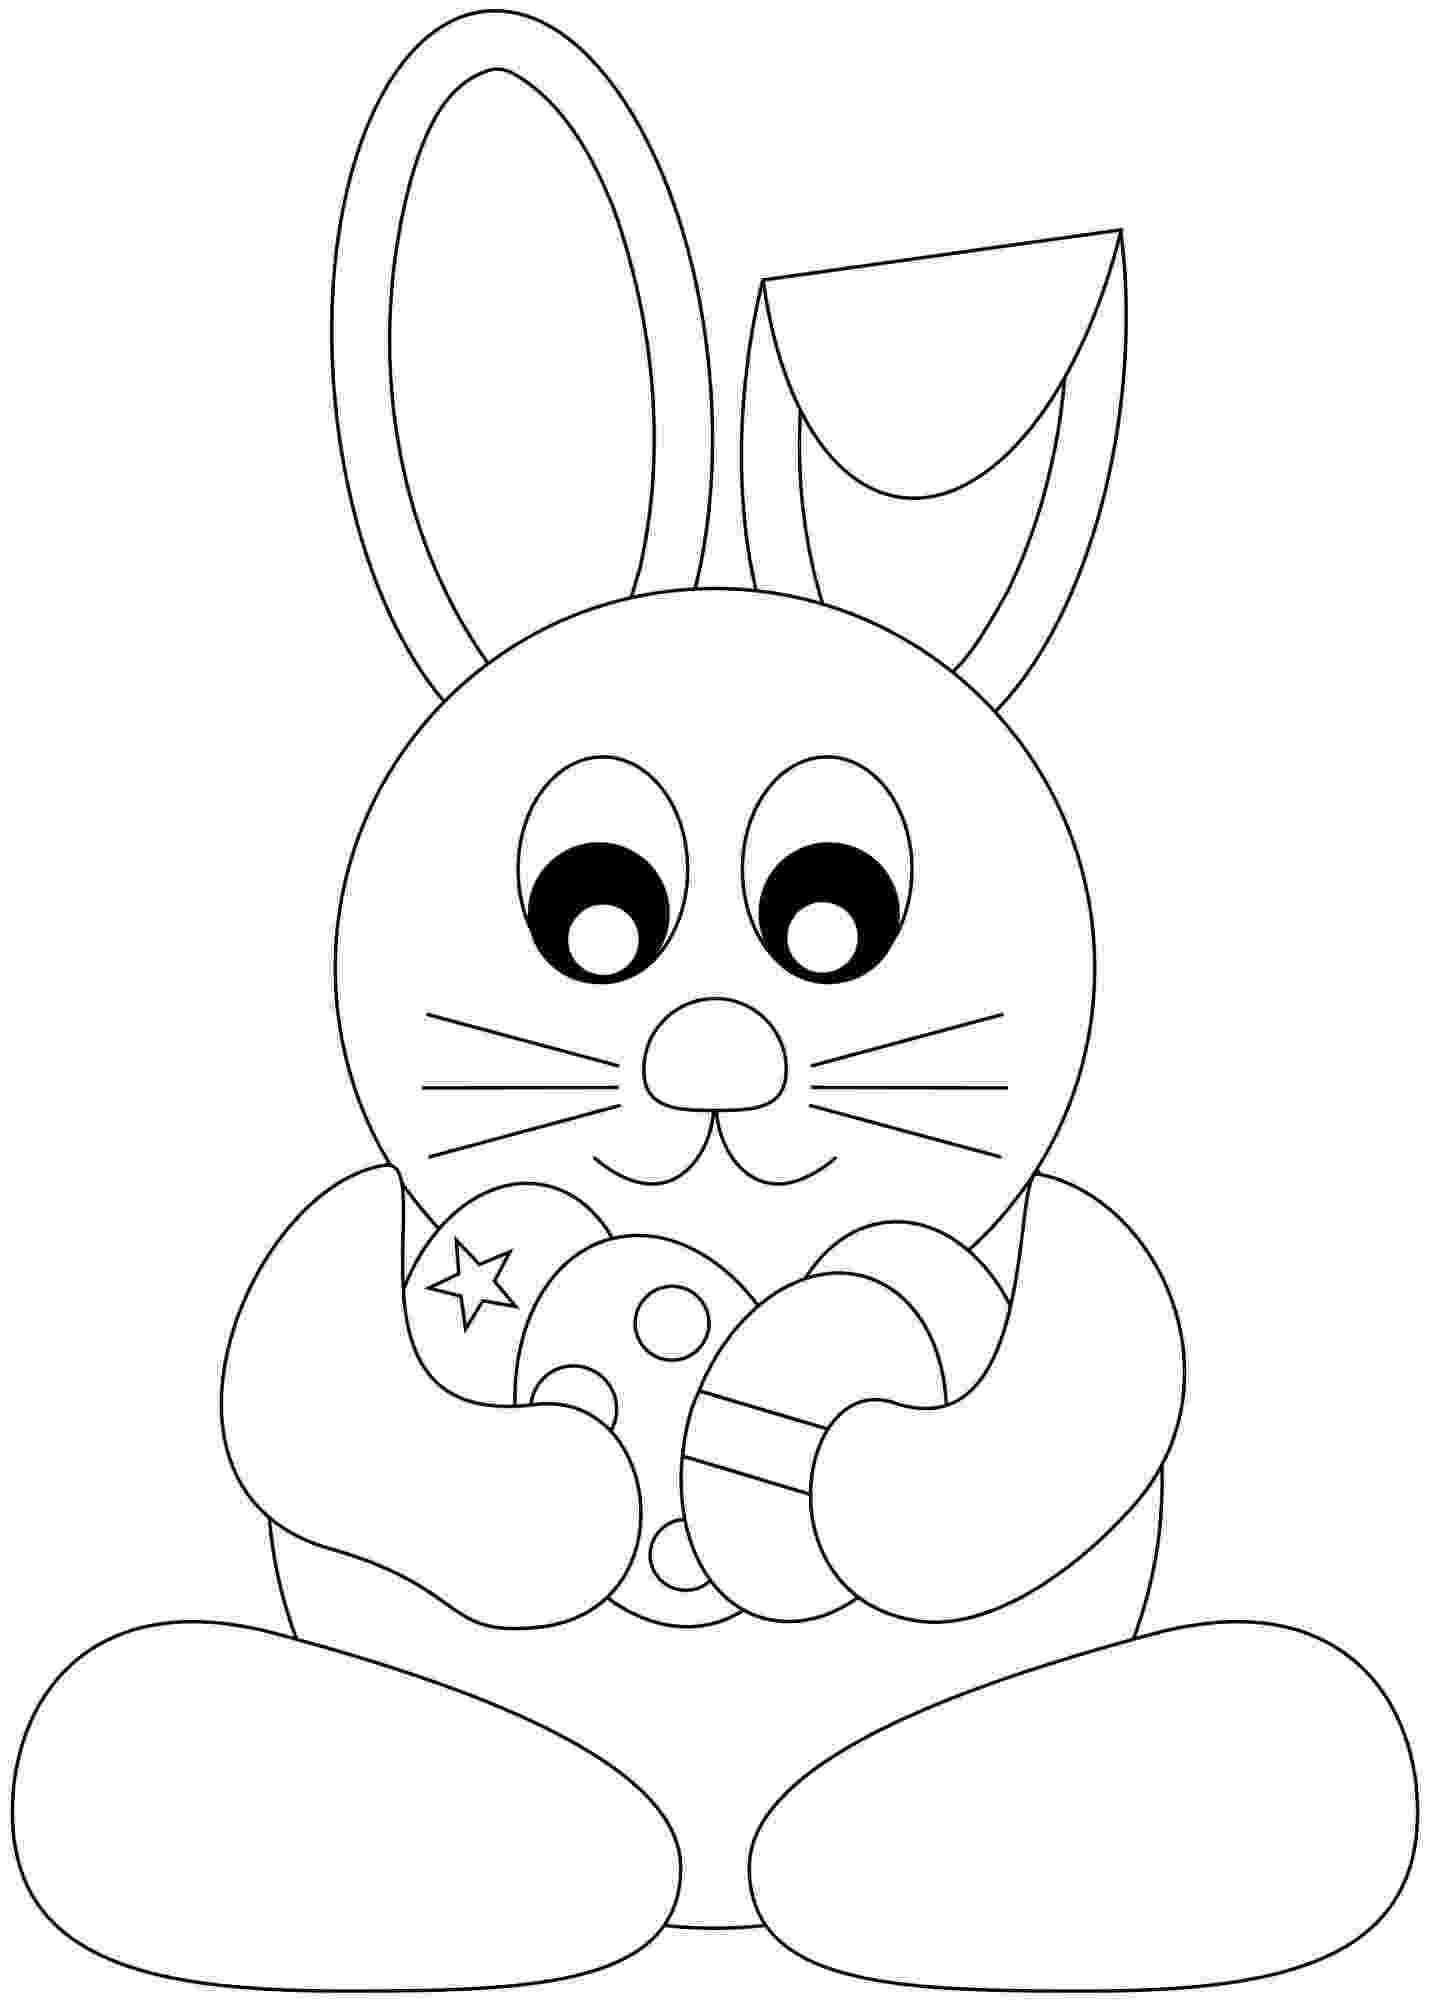 easter coloring sheets free printable disney easter coloring pages 2 easter fun at disney39s easter printable sheets coloring free 